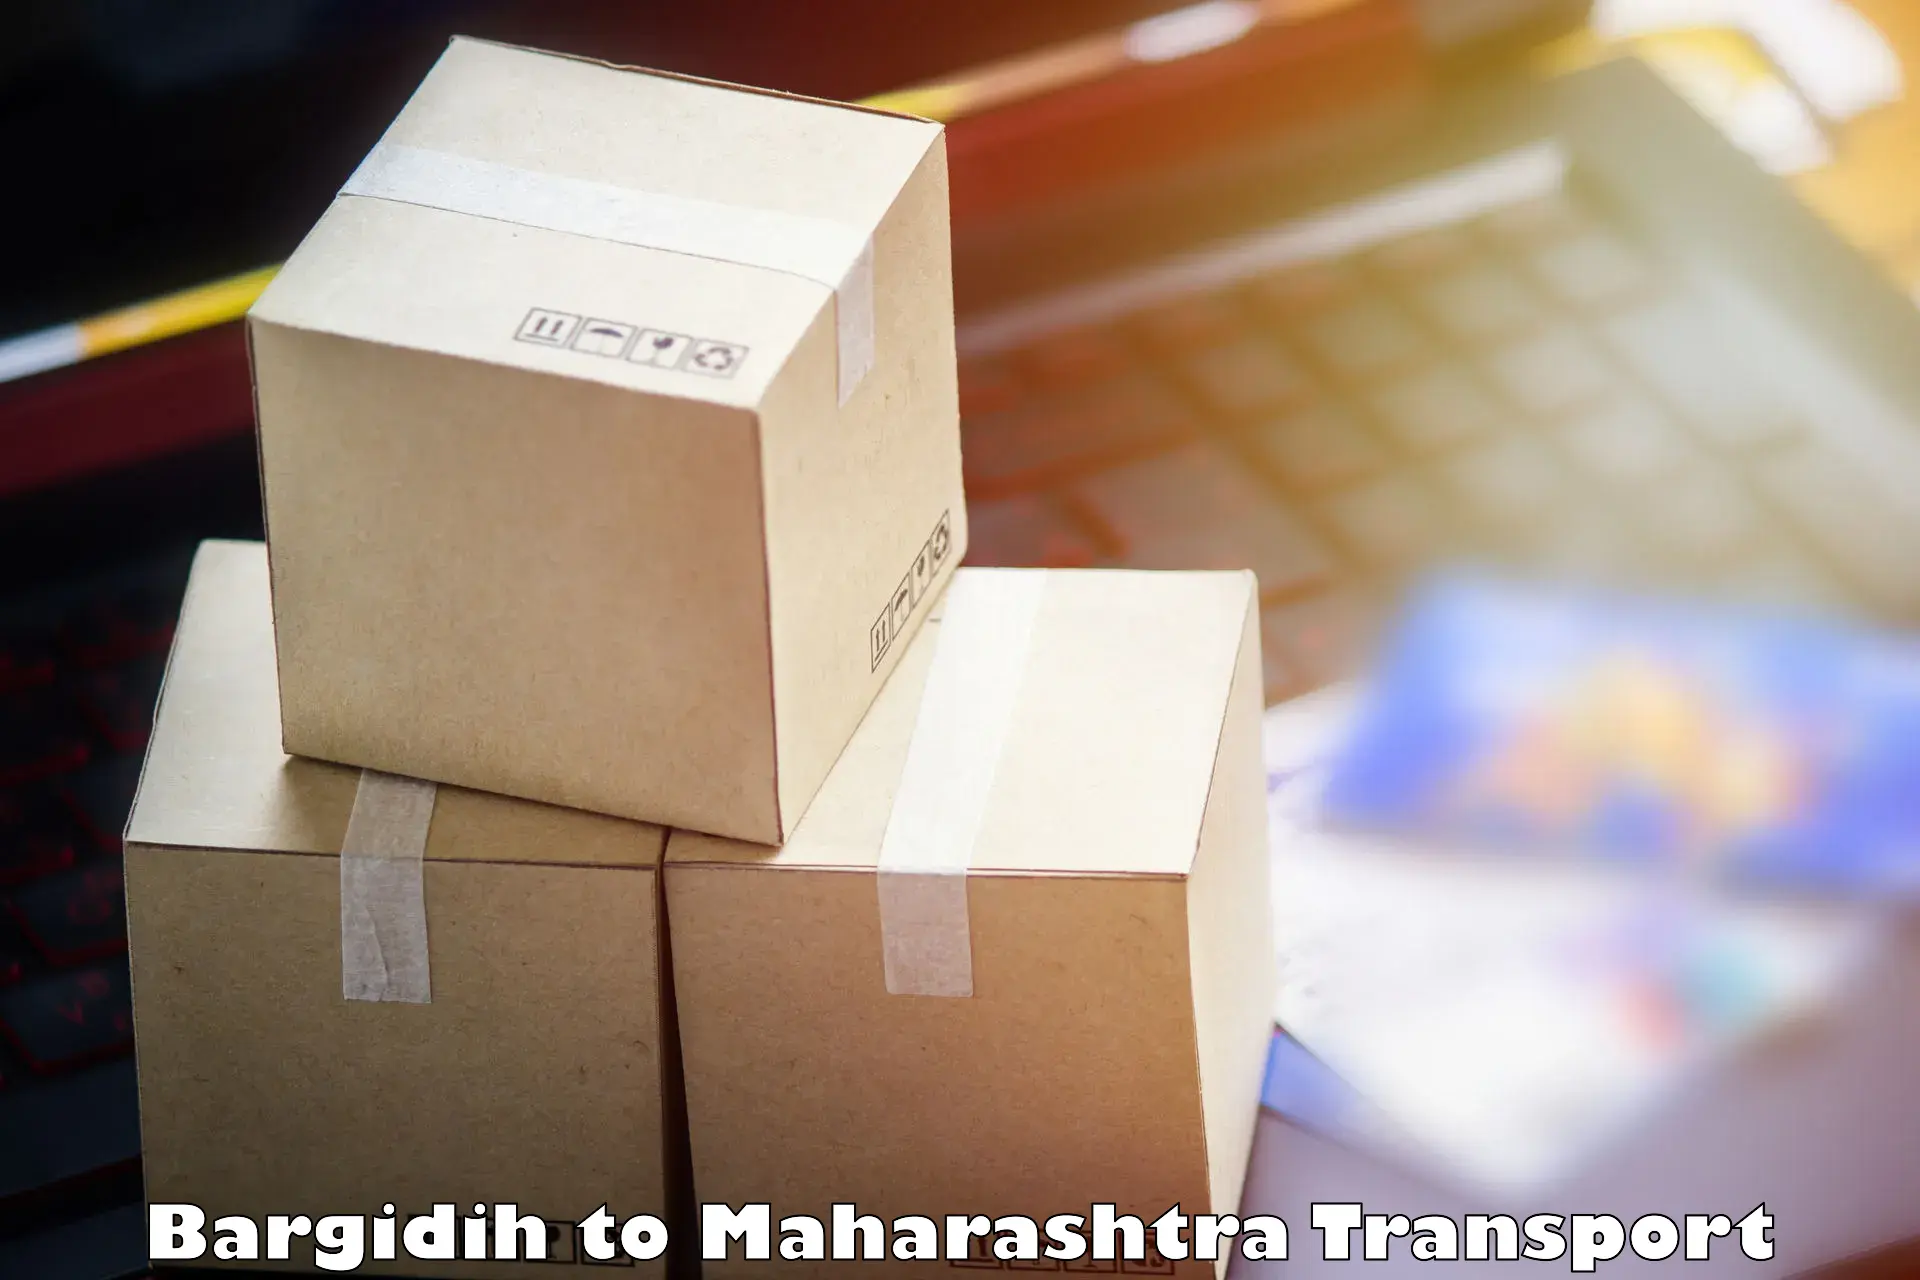 Road transport online services Bargidih to SVKMs Narsee Monjee Institute of Management Studies Mumbai